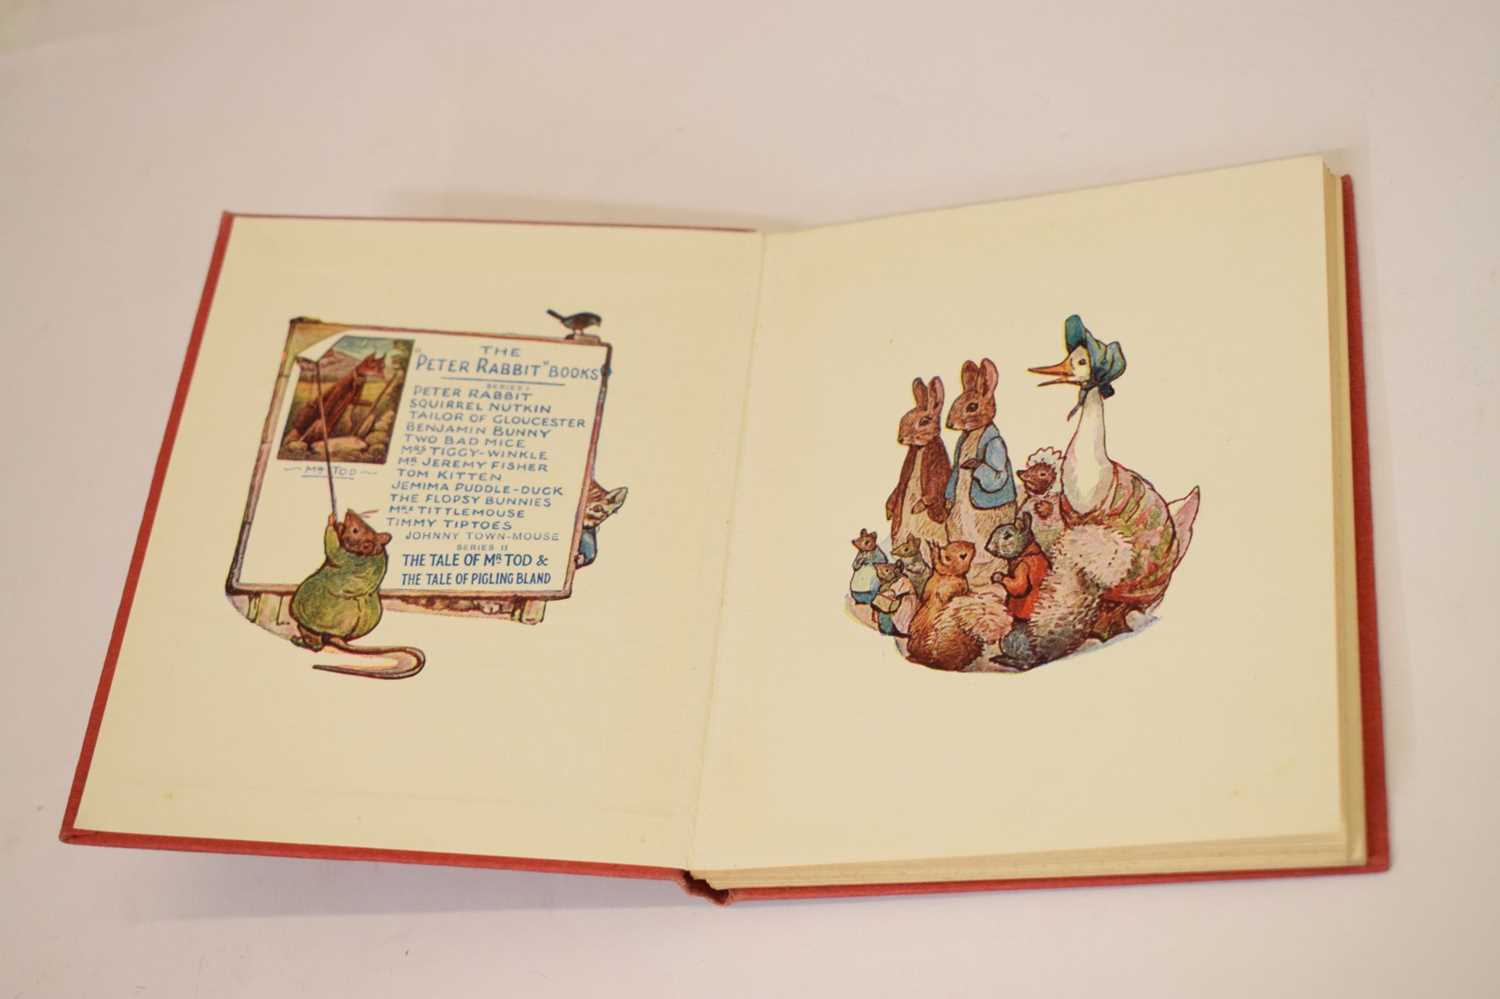 Potter, Beatrix - 'Cecily Parsley's Nursery Rhymes' - First edition - Image 7 of 37